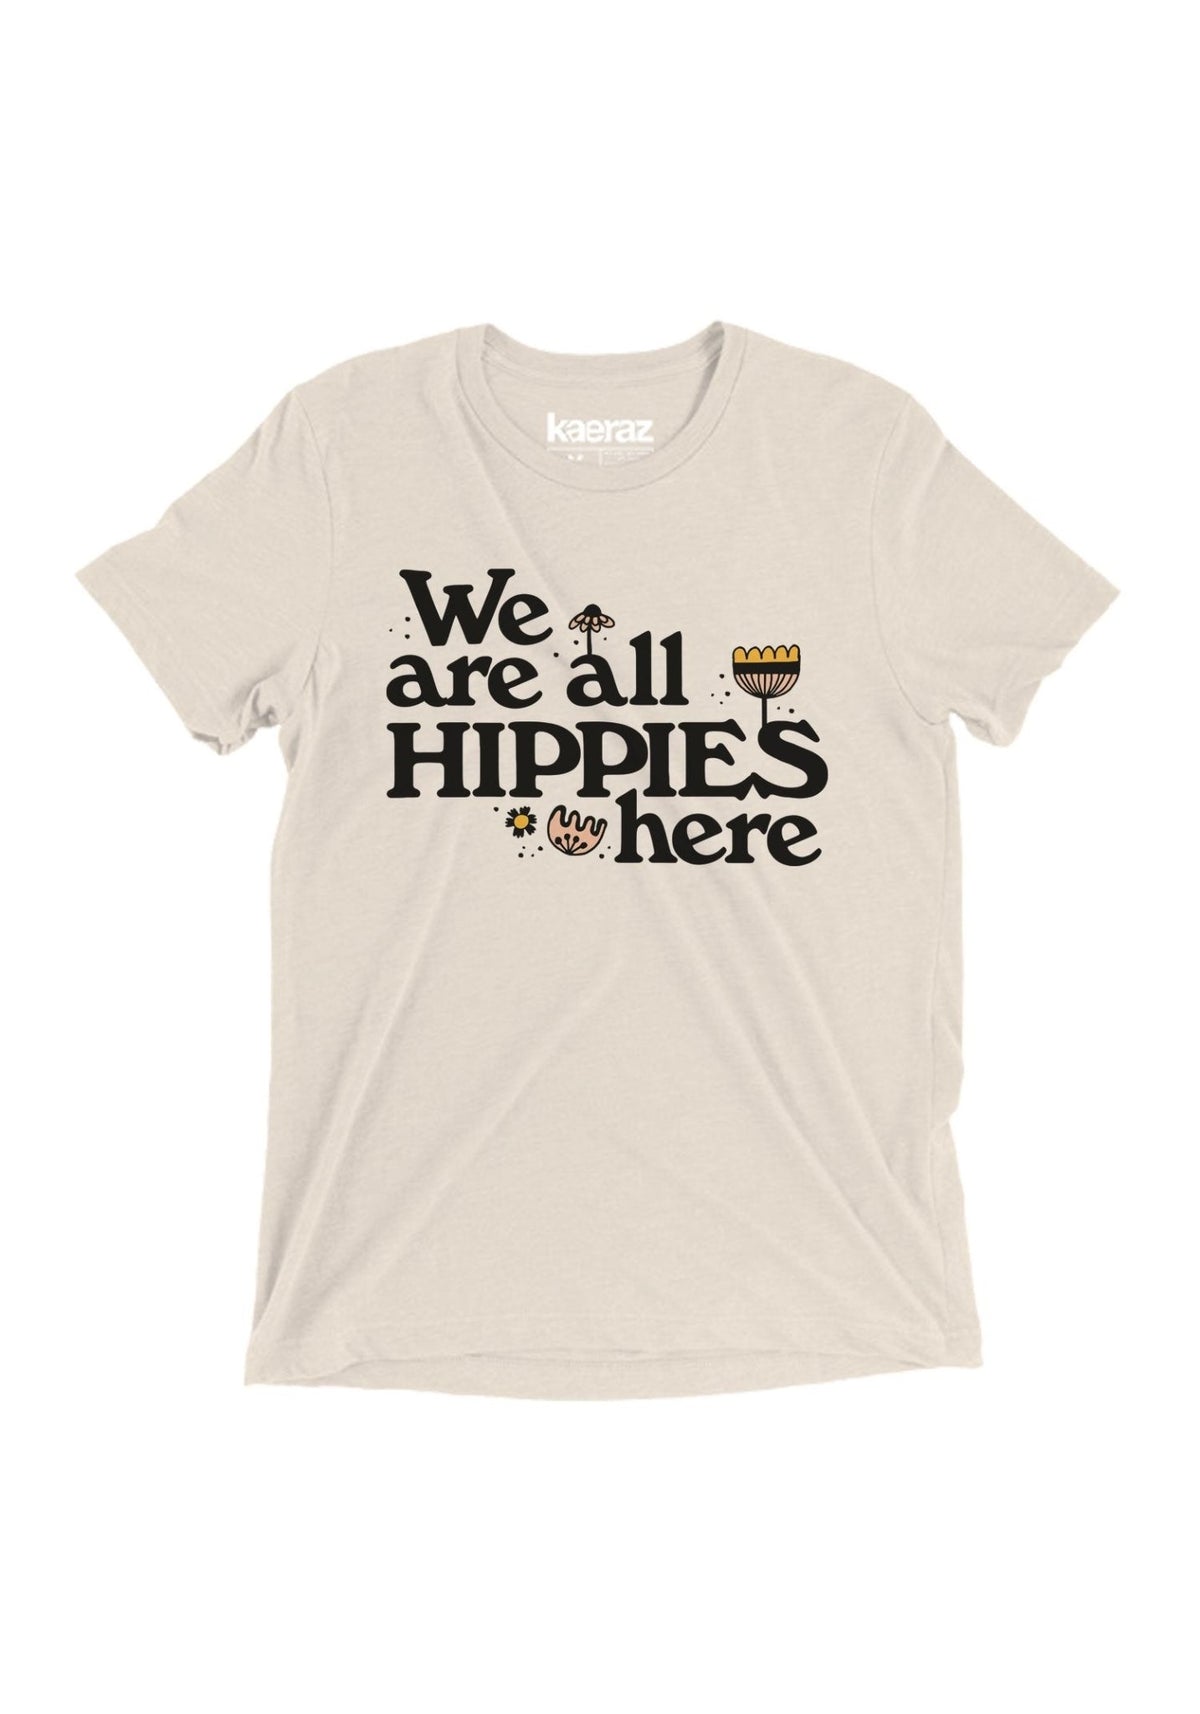 We Are All Hippies Here Tee by kaeraz 60s 70s flower